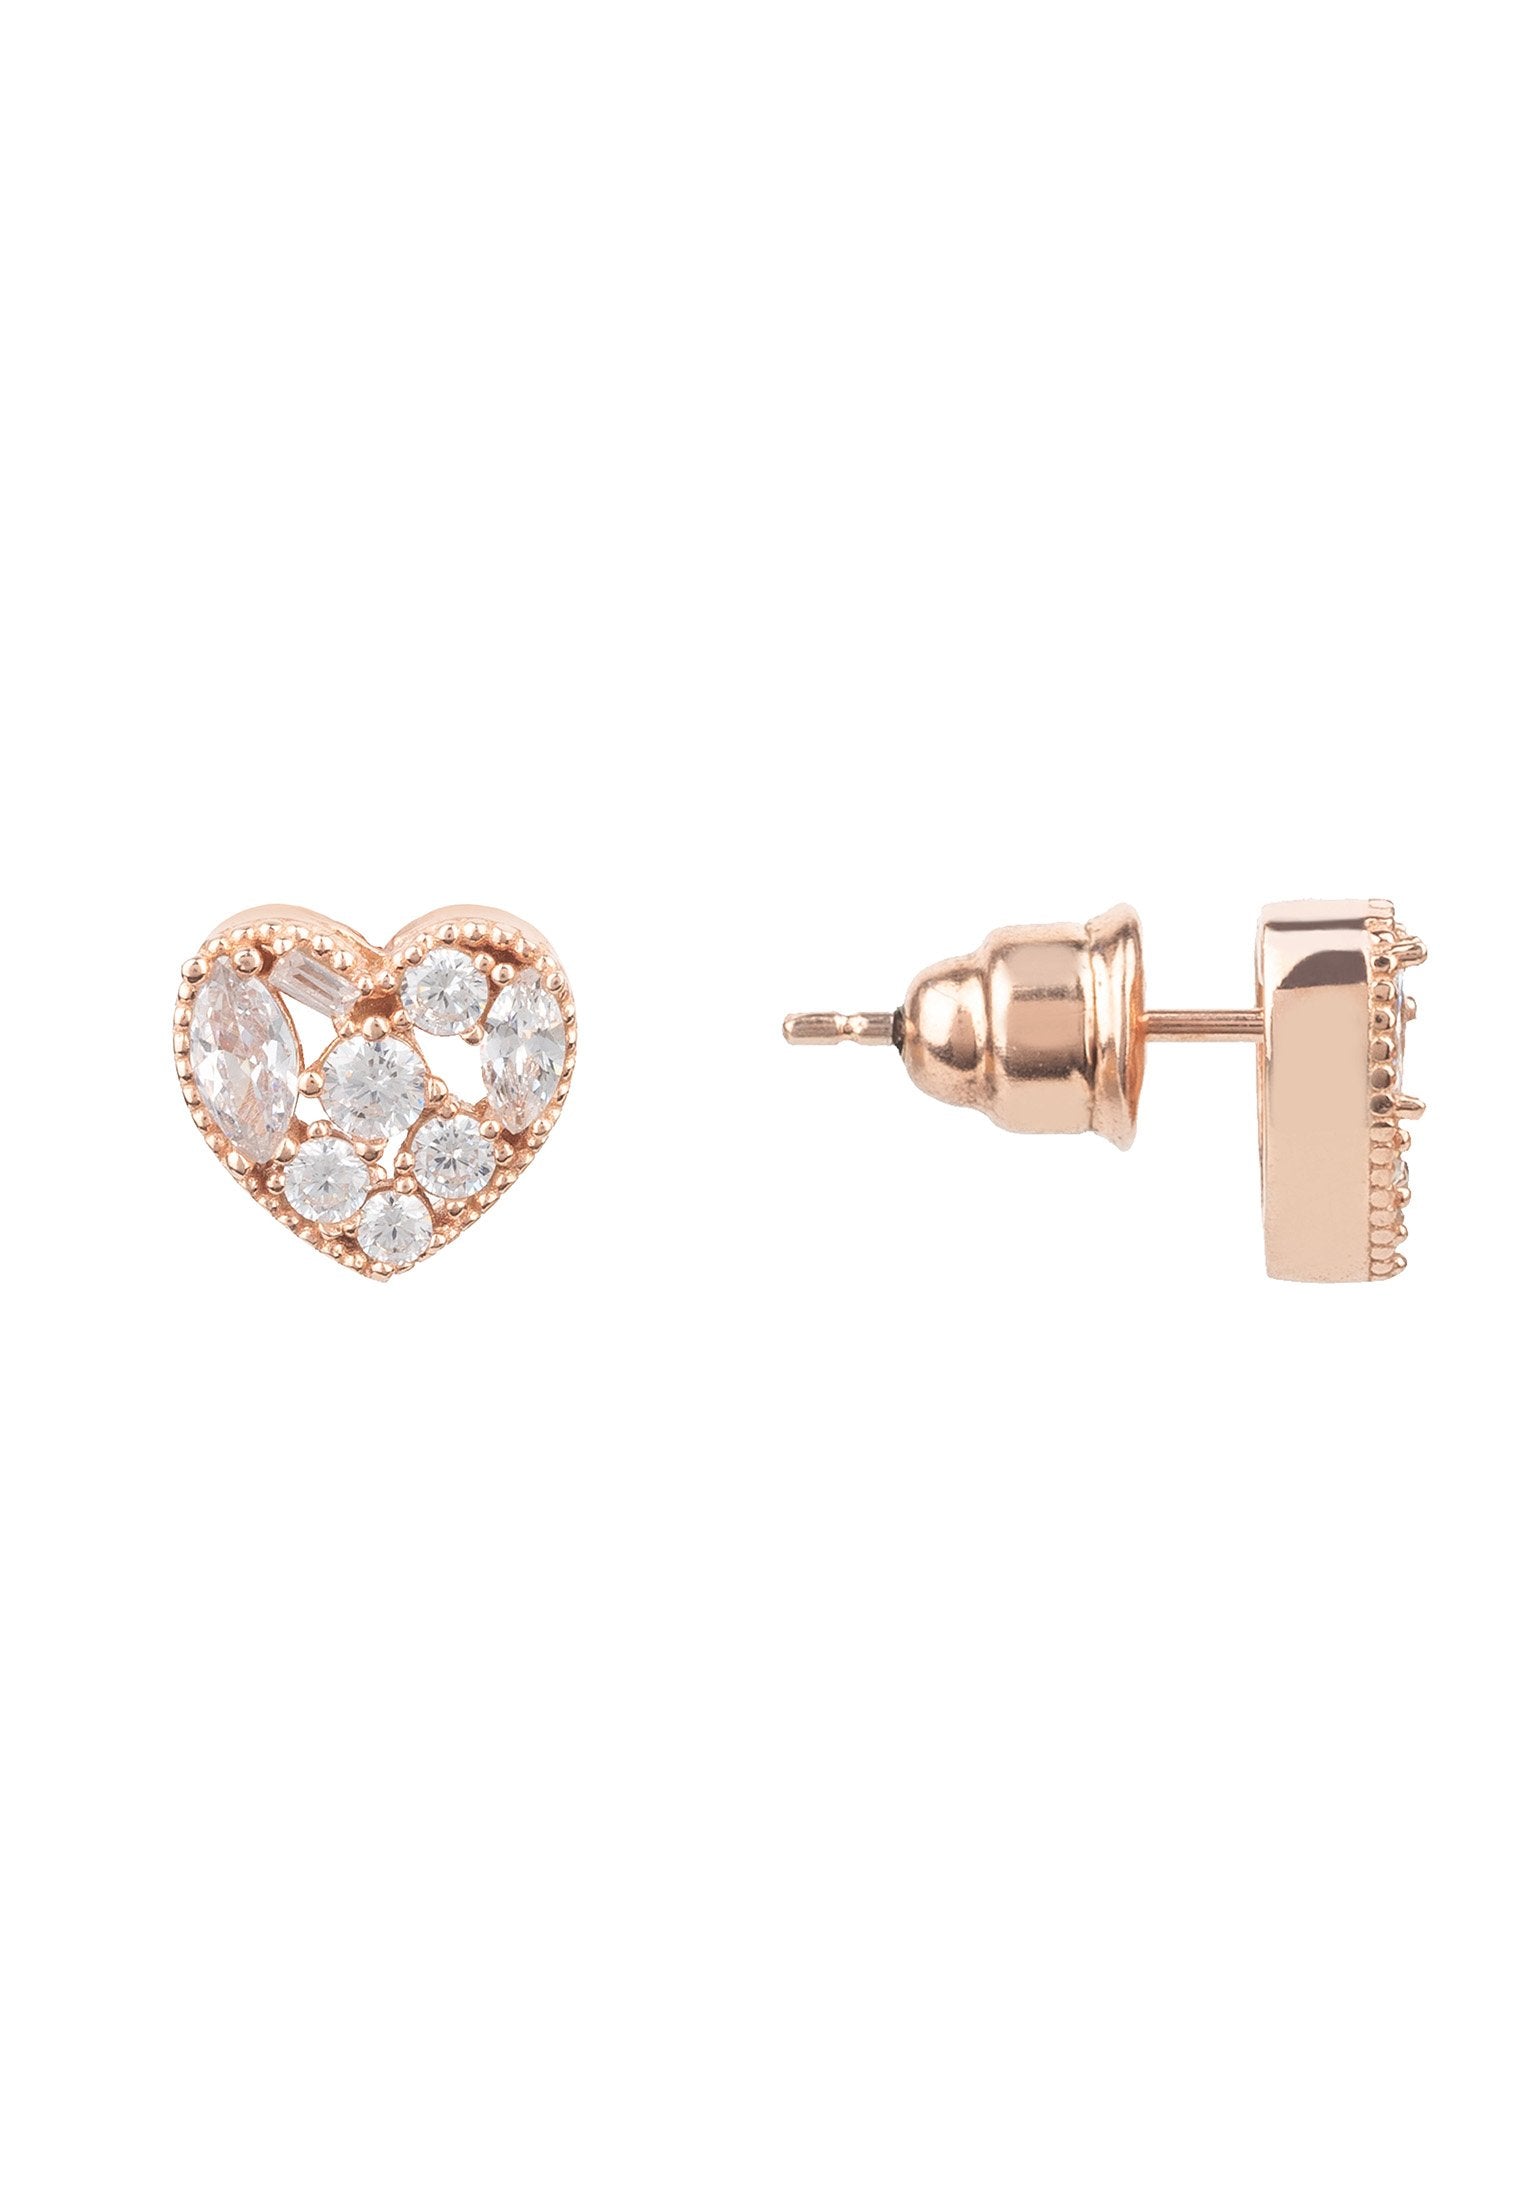 Rosegold Heart Sparkling Stud Earrings - Delicate Baguette Zirconia Jewelry for Everyday Styling and Special Occasions - Jewelry & Watches - Bijou Her -  -  - 